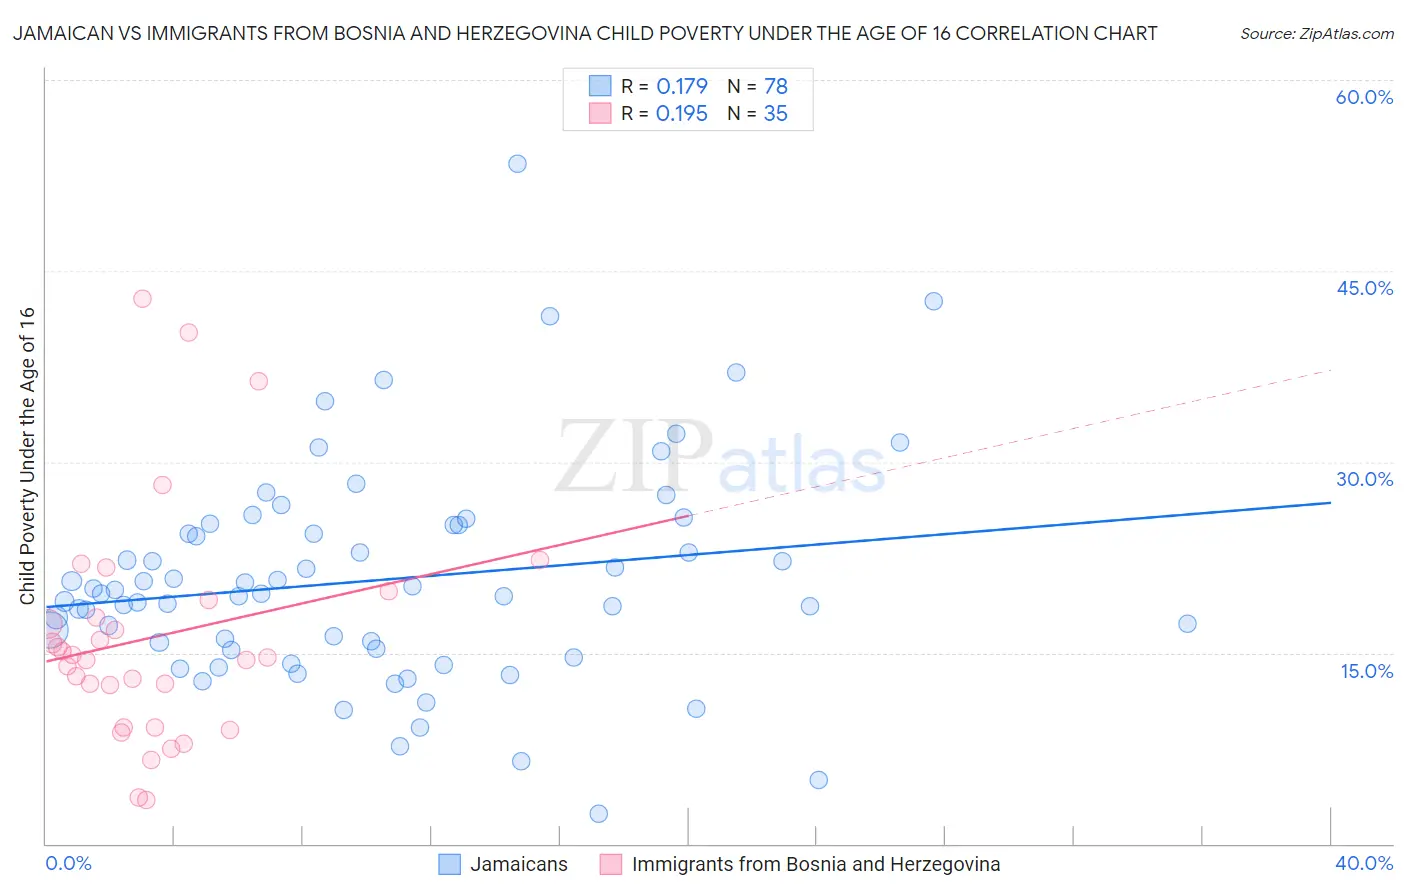 Jamaican vs Immigrants from Bosnia and Herzegovina Child Poverty Under the Age of 16